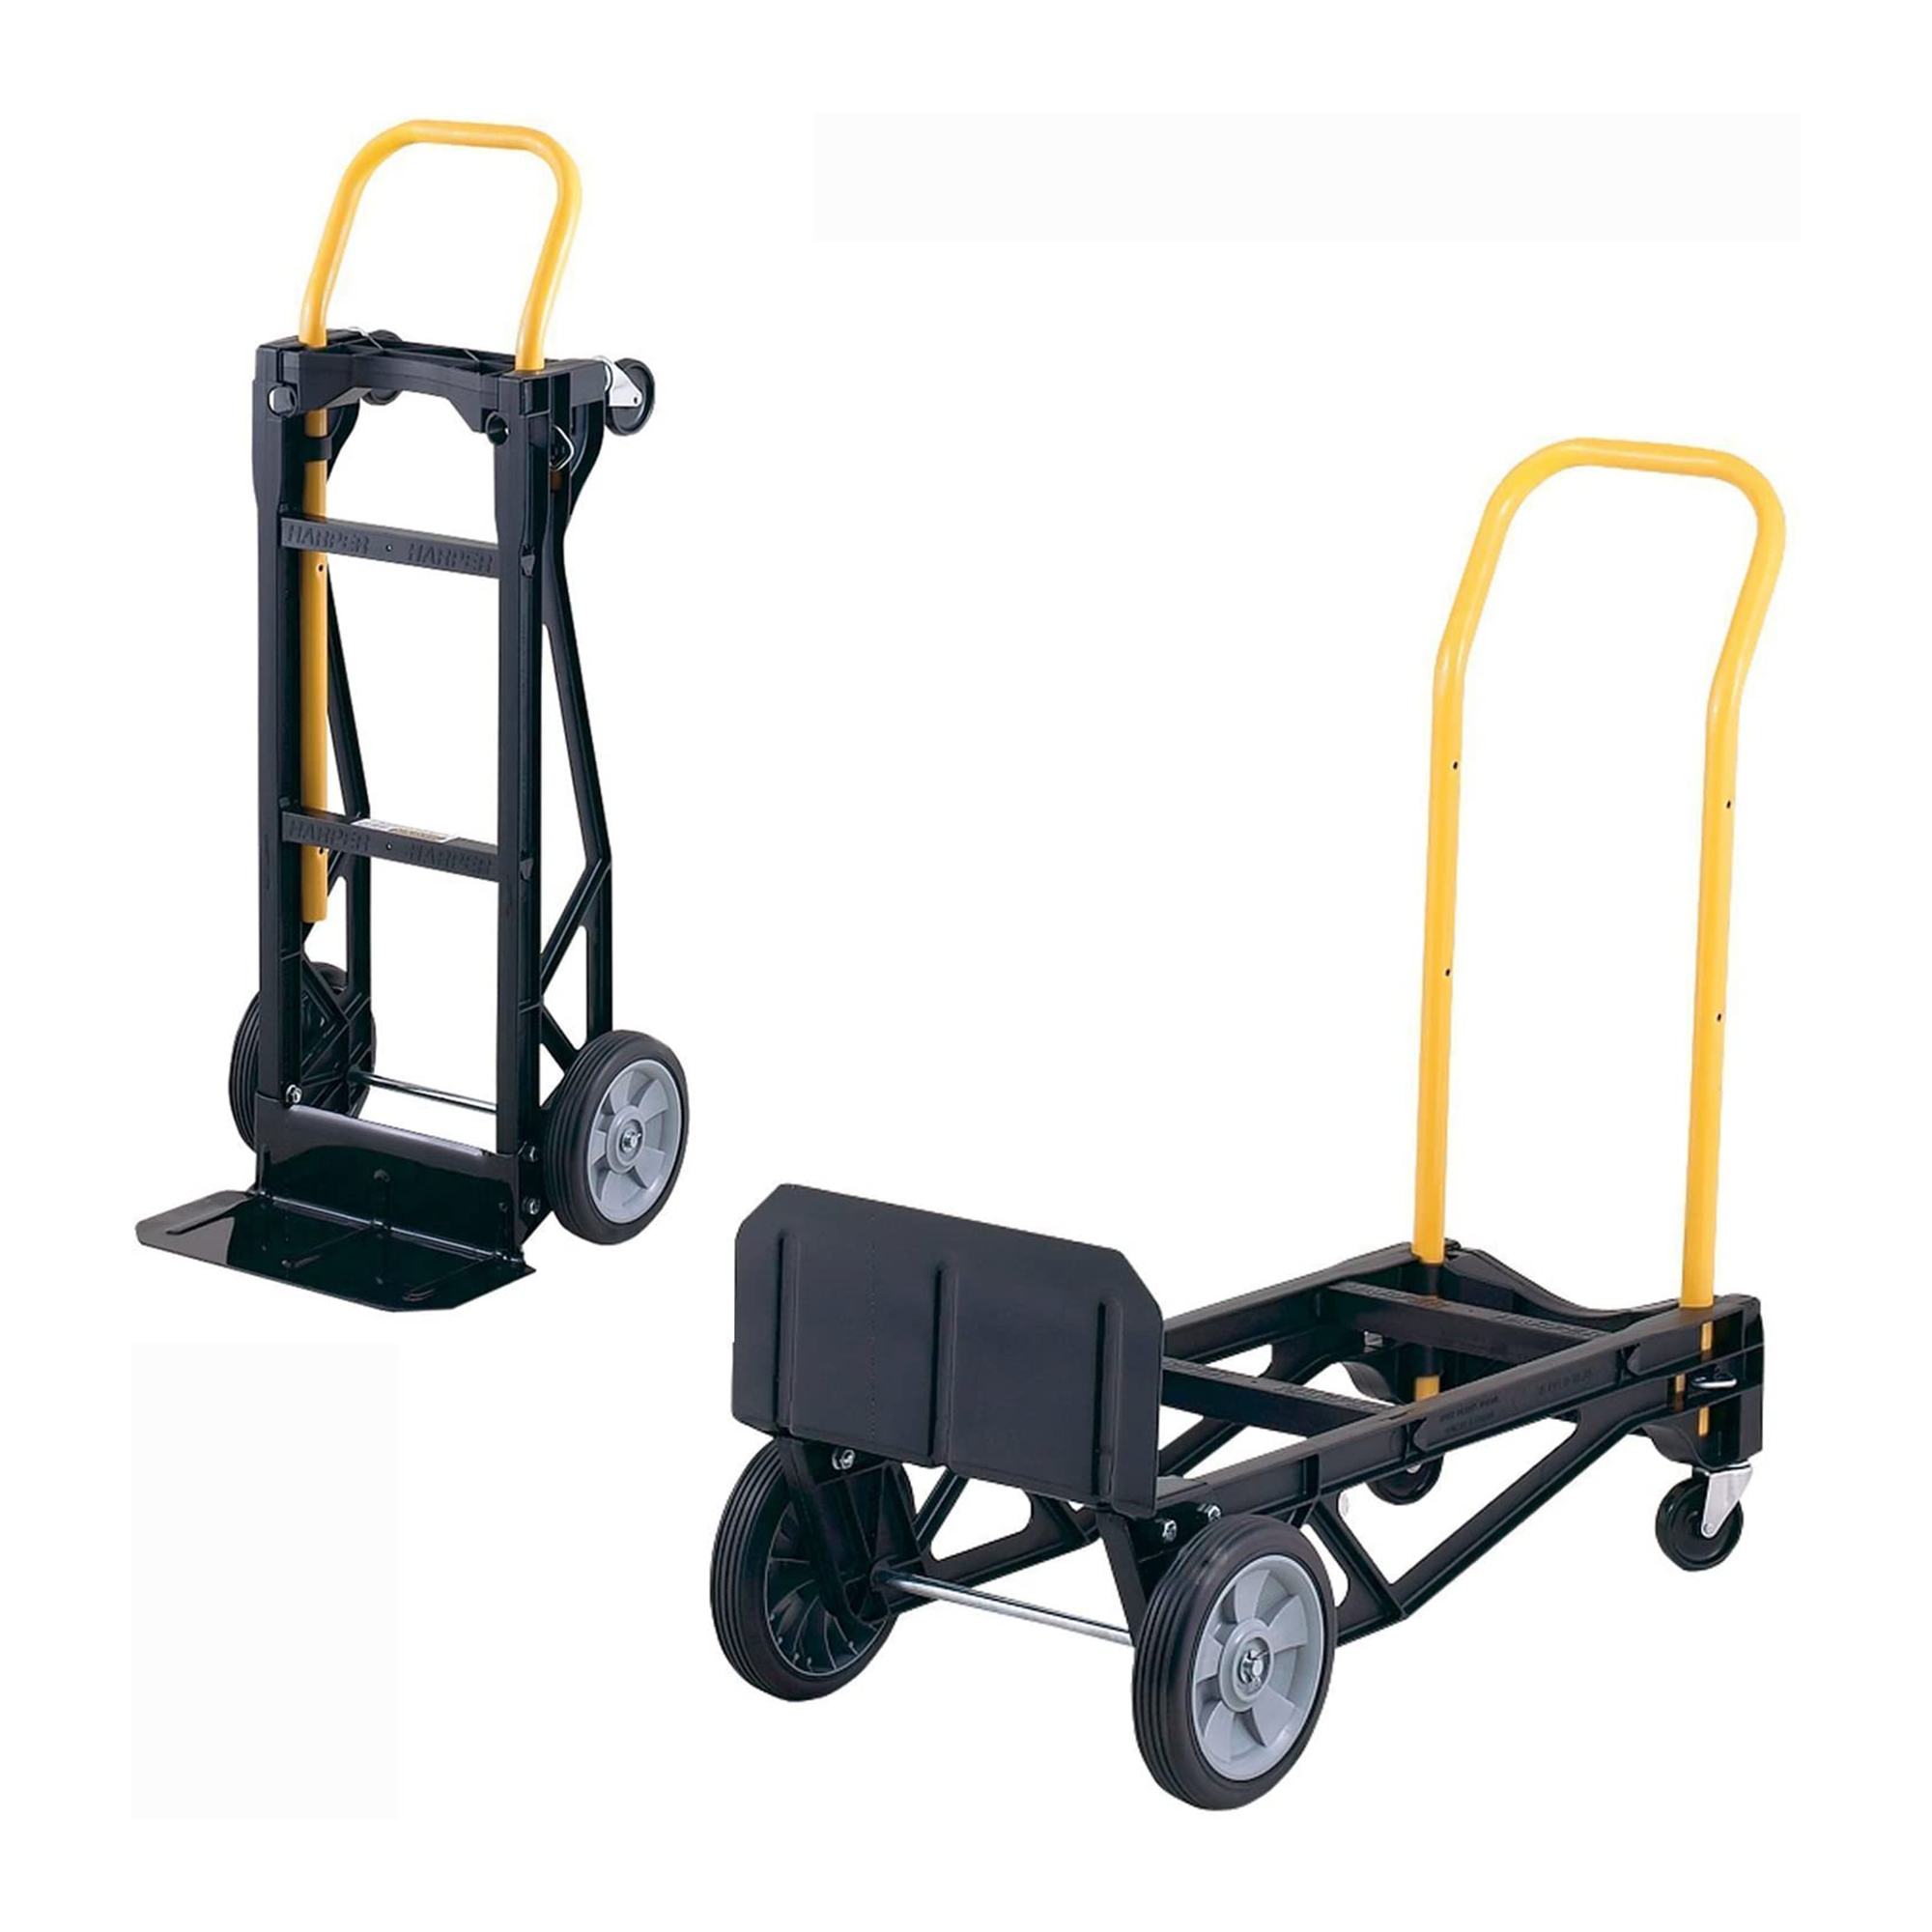 Harper Trucks PJDY2223AKD Hand Truck and Dolly, 400 Lb Capacity, Black - image 2 of 5